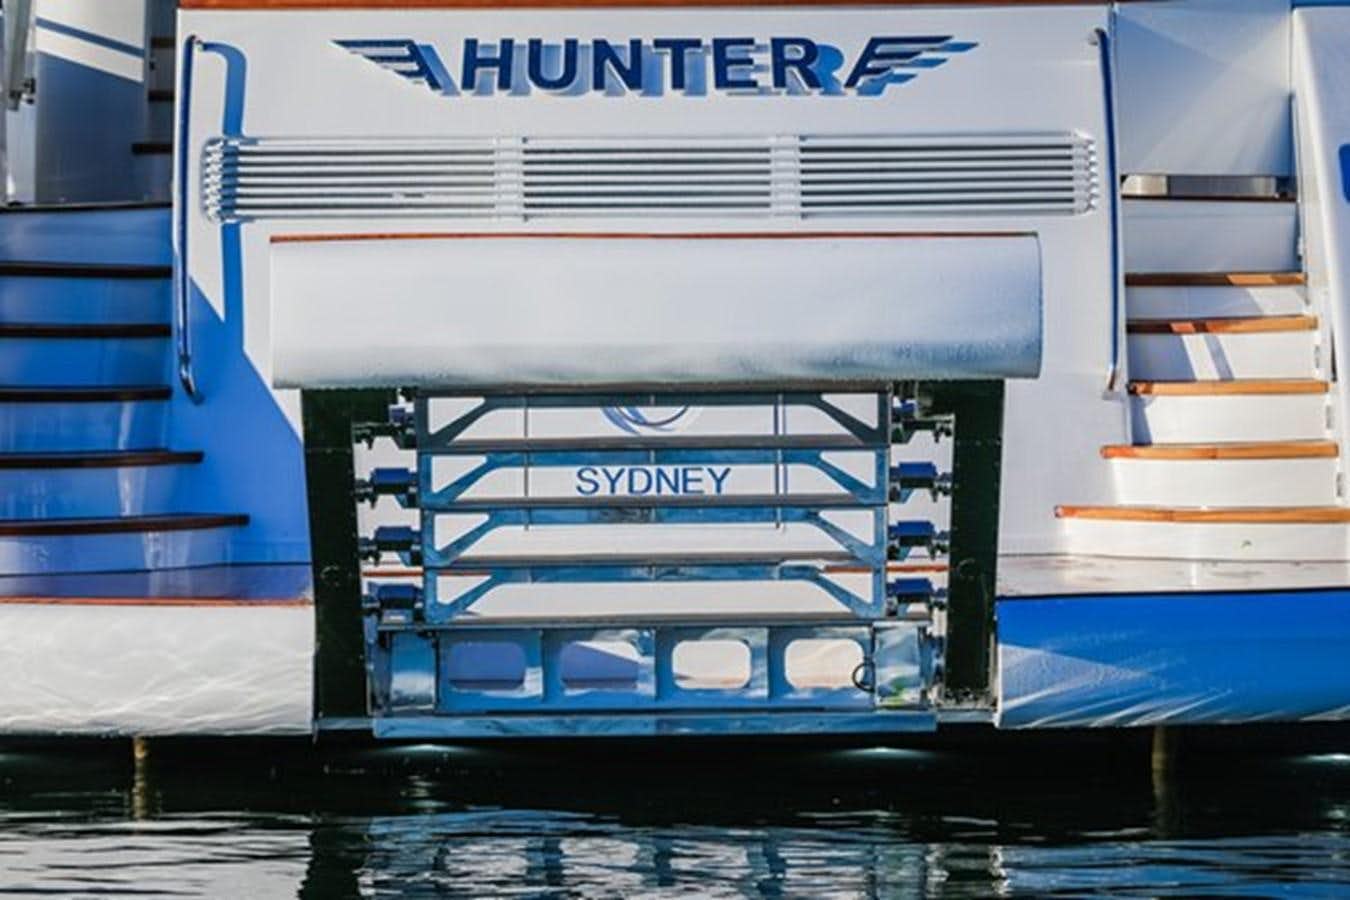 Hunter
Yacht for Sale